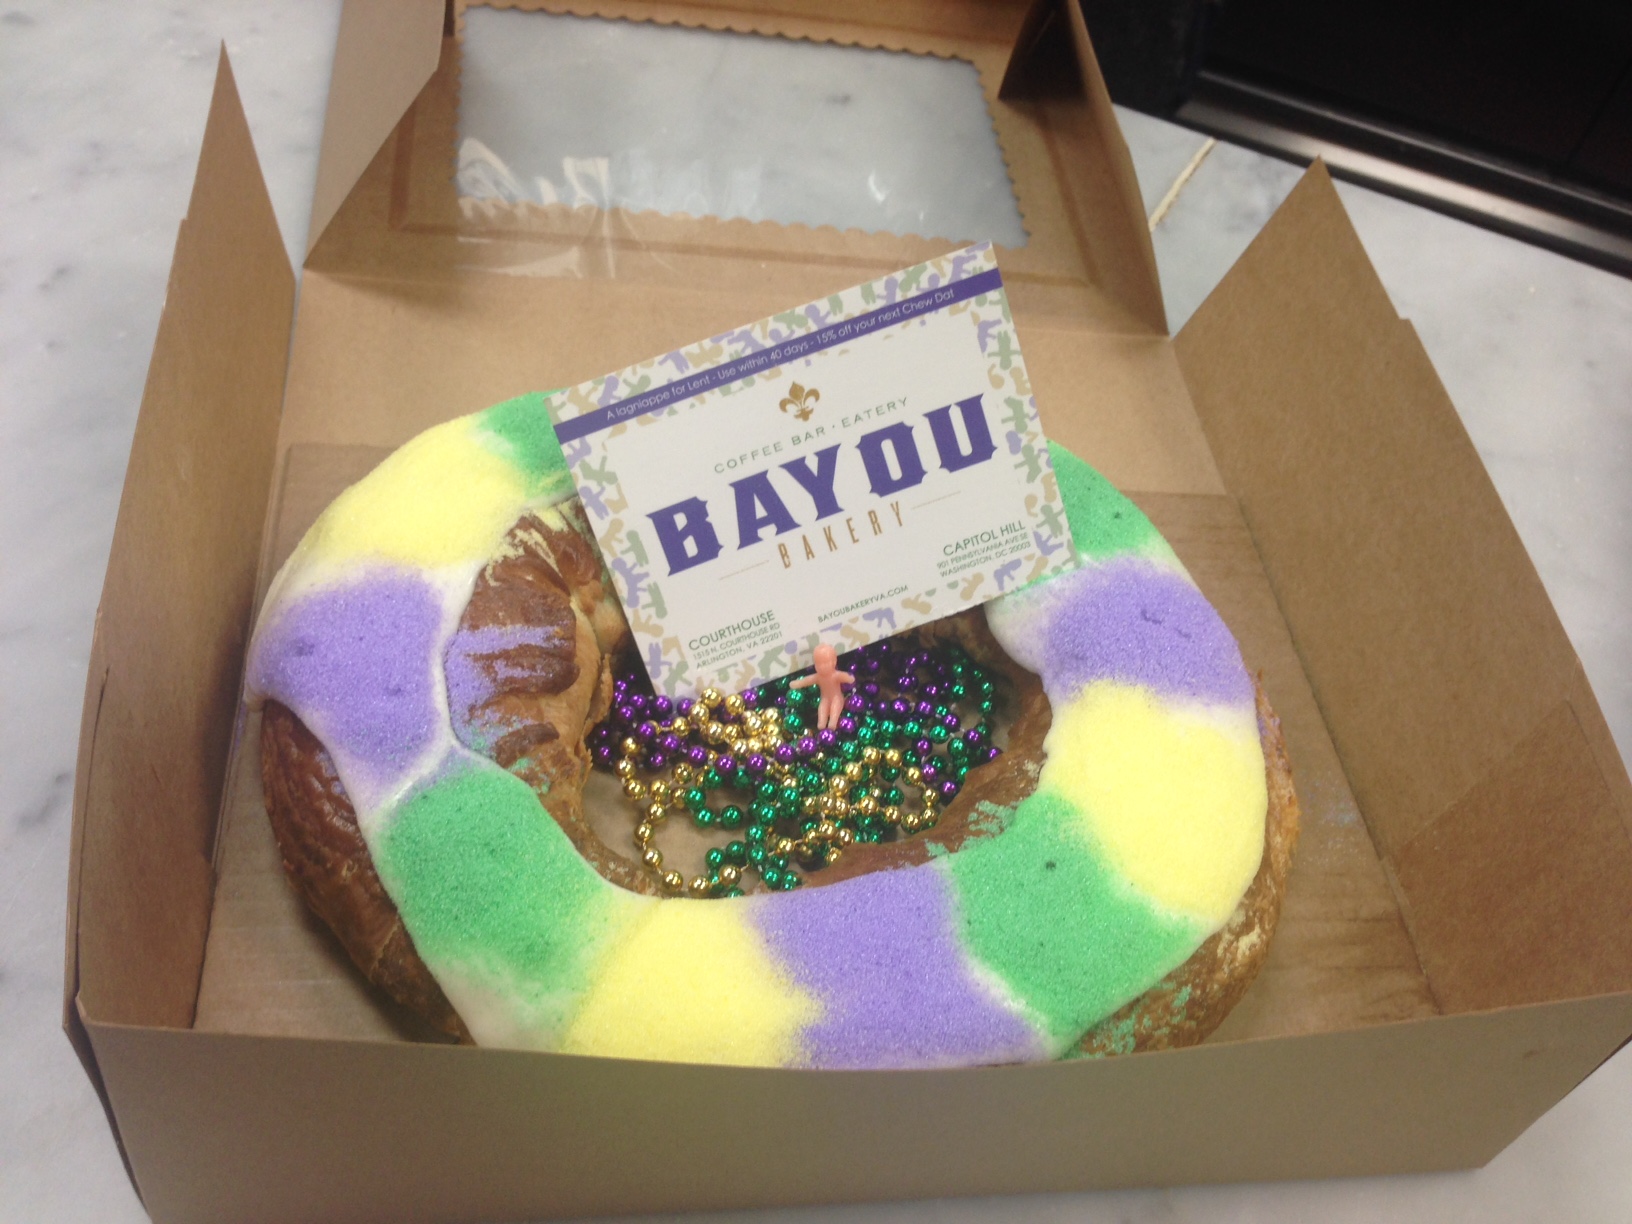 Mardi Gras King Cake with Cream Cheese and Pecan Filling